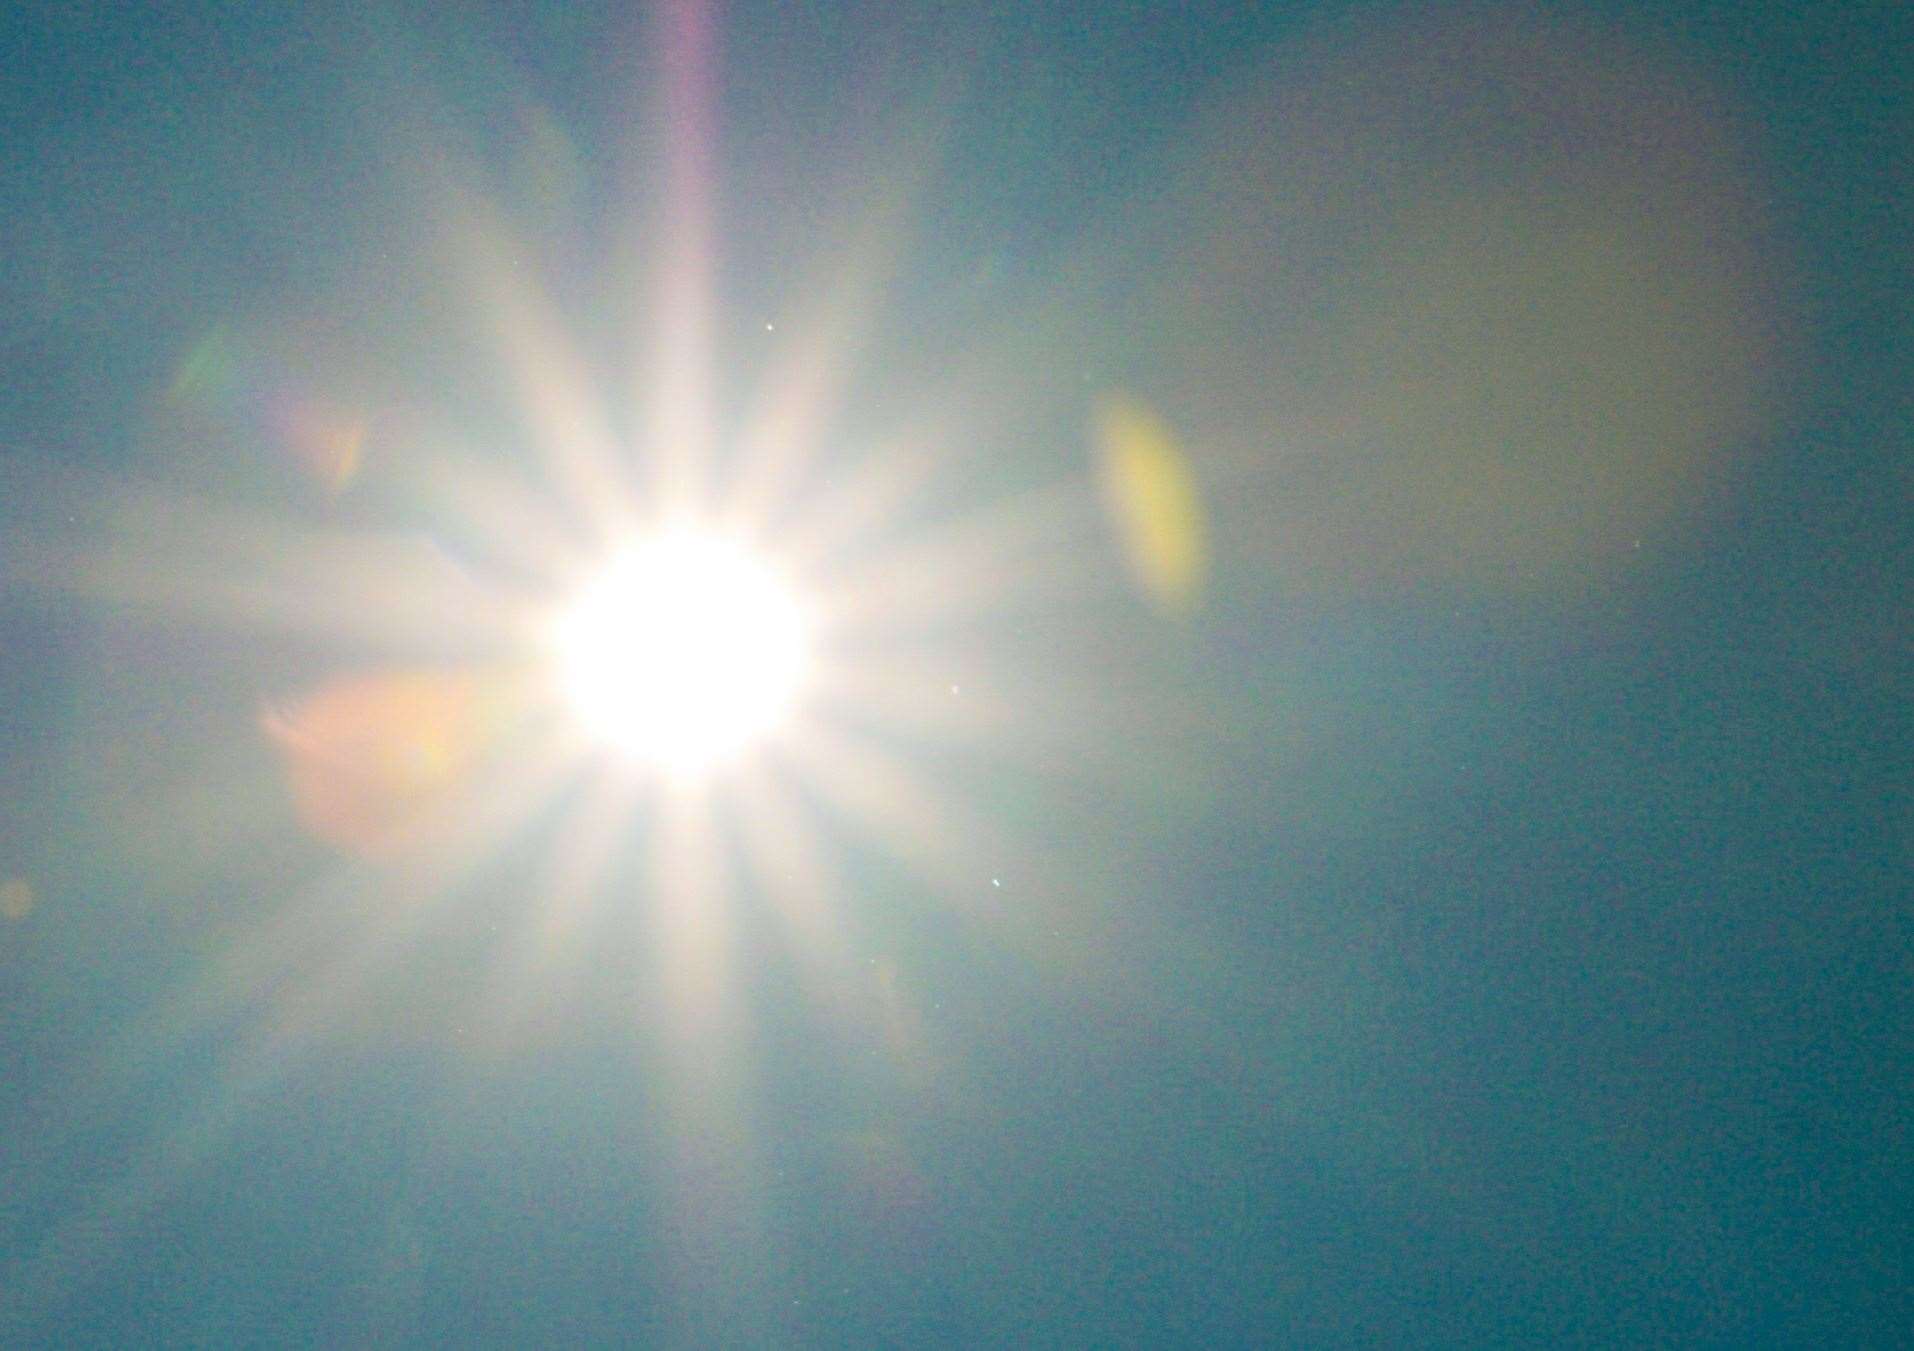 Temperatures in some parts of Italy could reach 48C by the end of the week. Image: iStock.